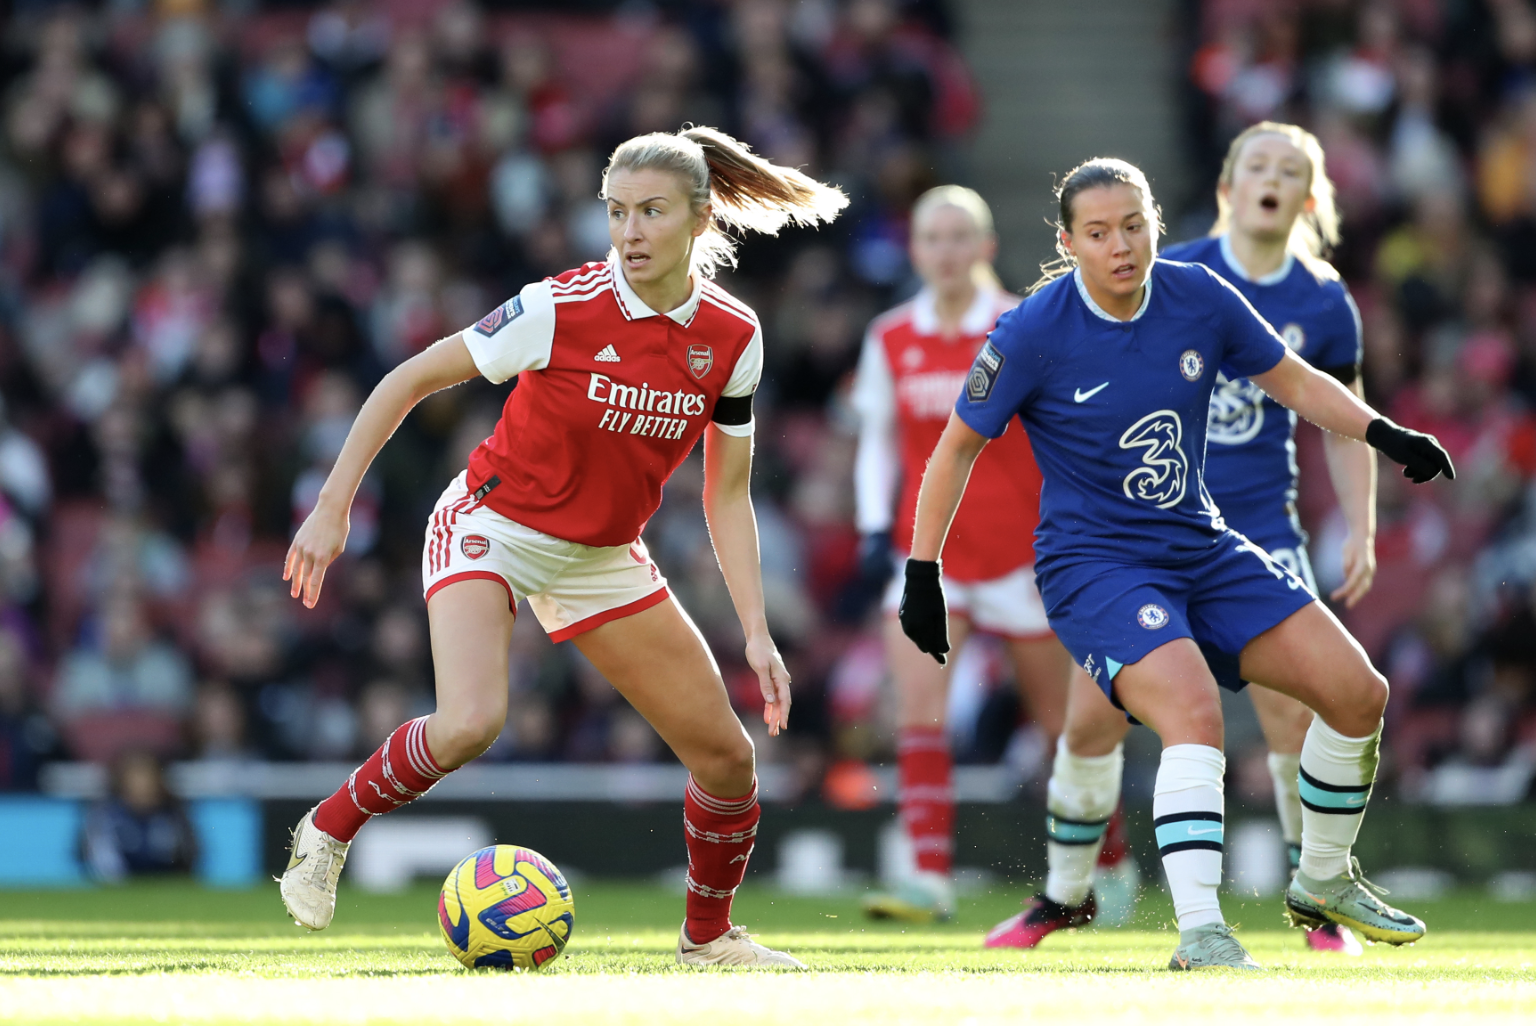 Conti Cup Final Live Blog: Arsenal Women take on Chelsea at Molineux